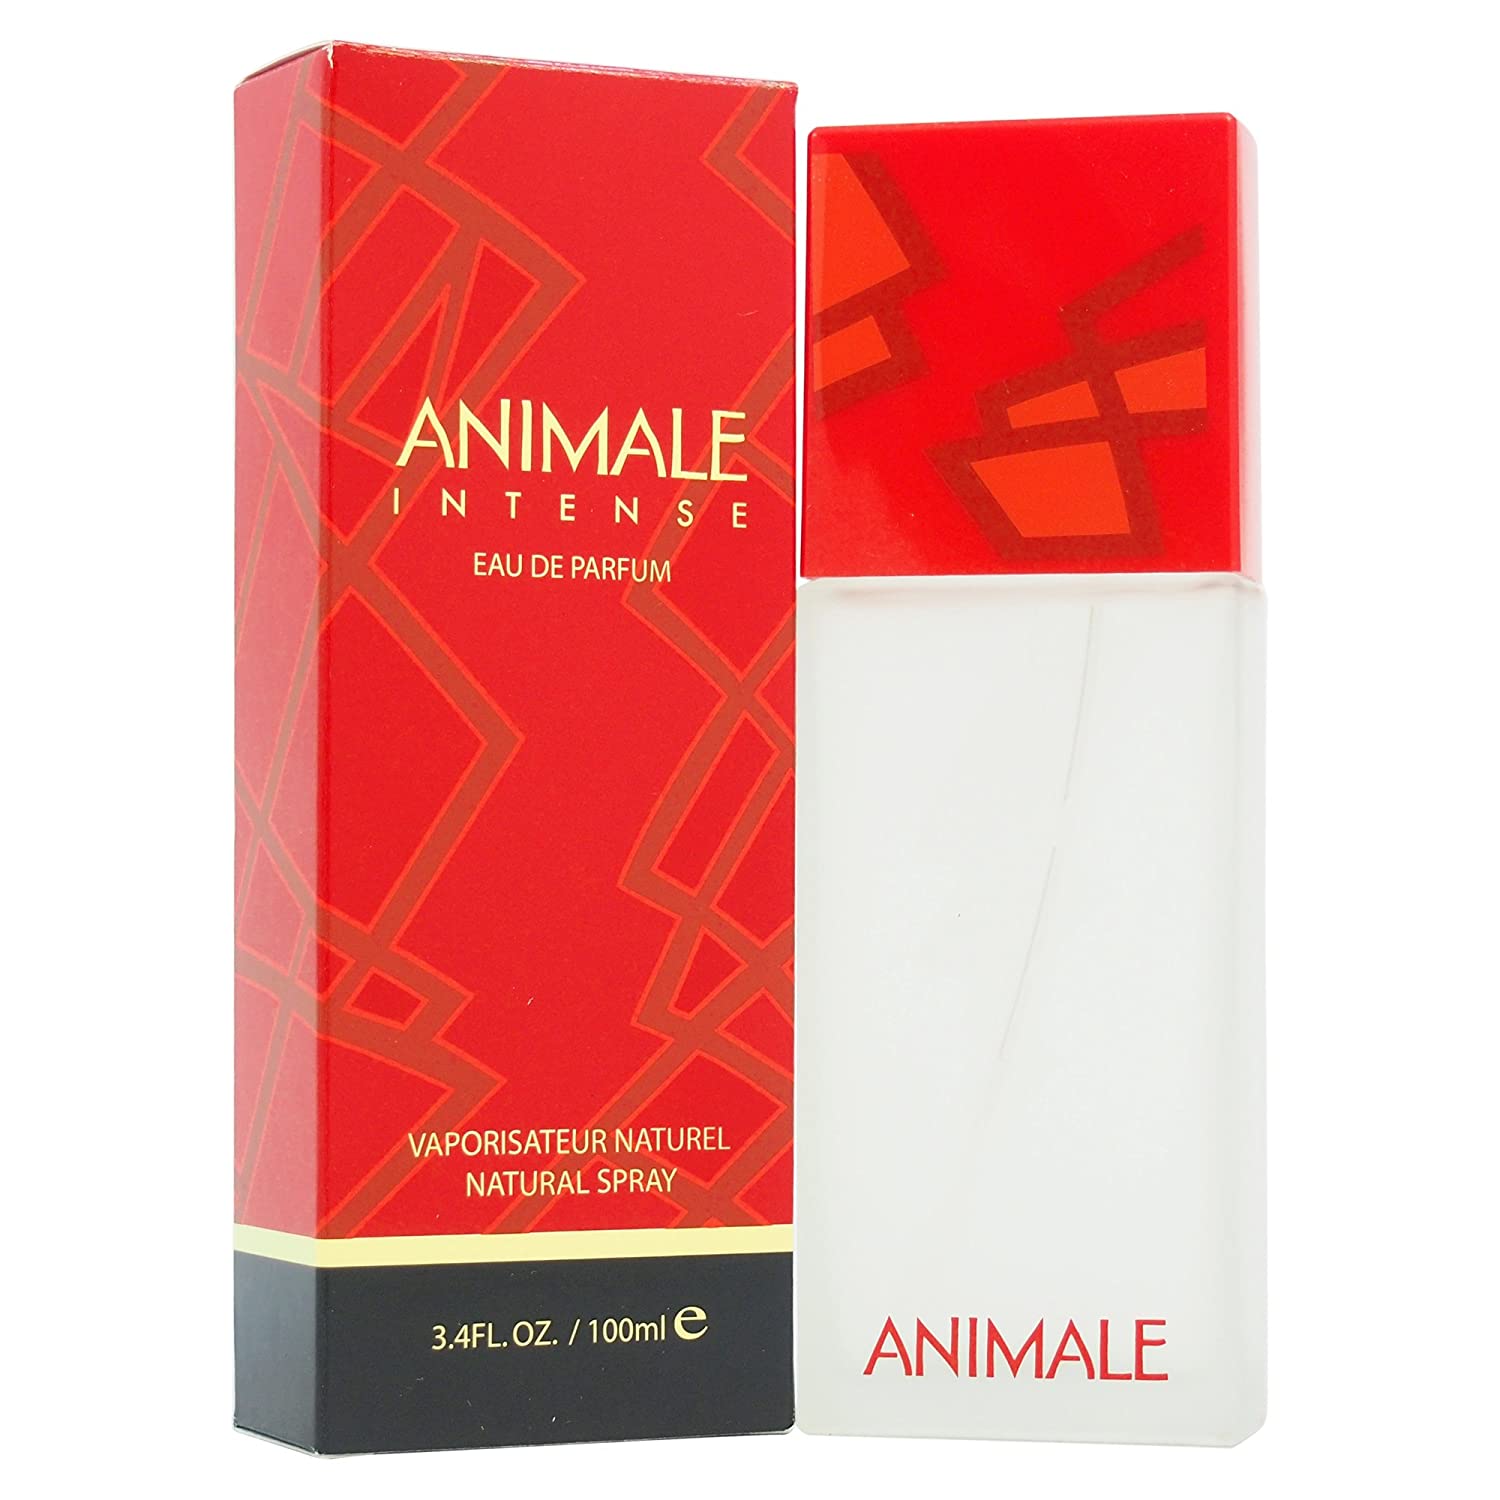 Brand: Animale.
Size: 3.4 oz.
Introduced in 2011, Animale Intense perfume by Animale Parfum reminds you of an African safari or the wild moments in the wilderness. This long lasting scent is a warm mix of fruity and woody overtones as well as exotic flowers comprising notes such as grapefruit, freesia, black currant, passion flower and apple blossom. This signature perfume that lasts all day long is ideal for a womans everyday wear.